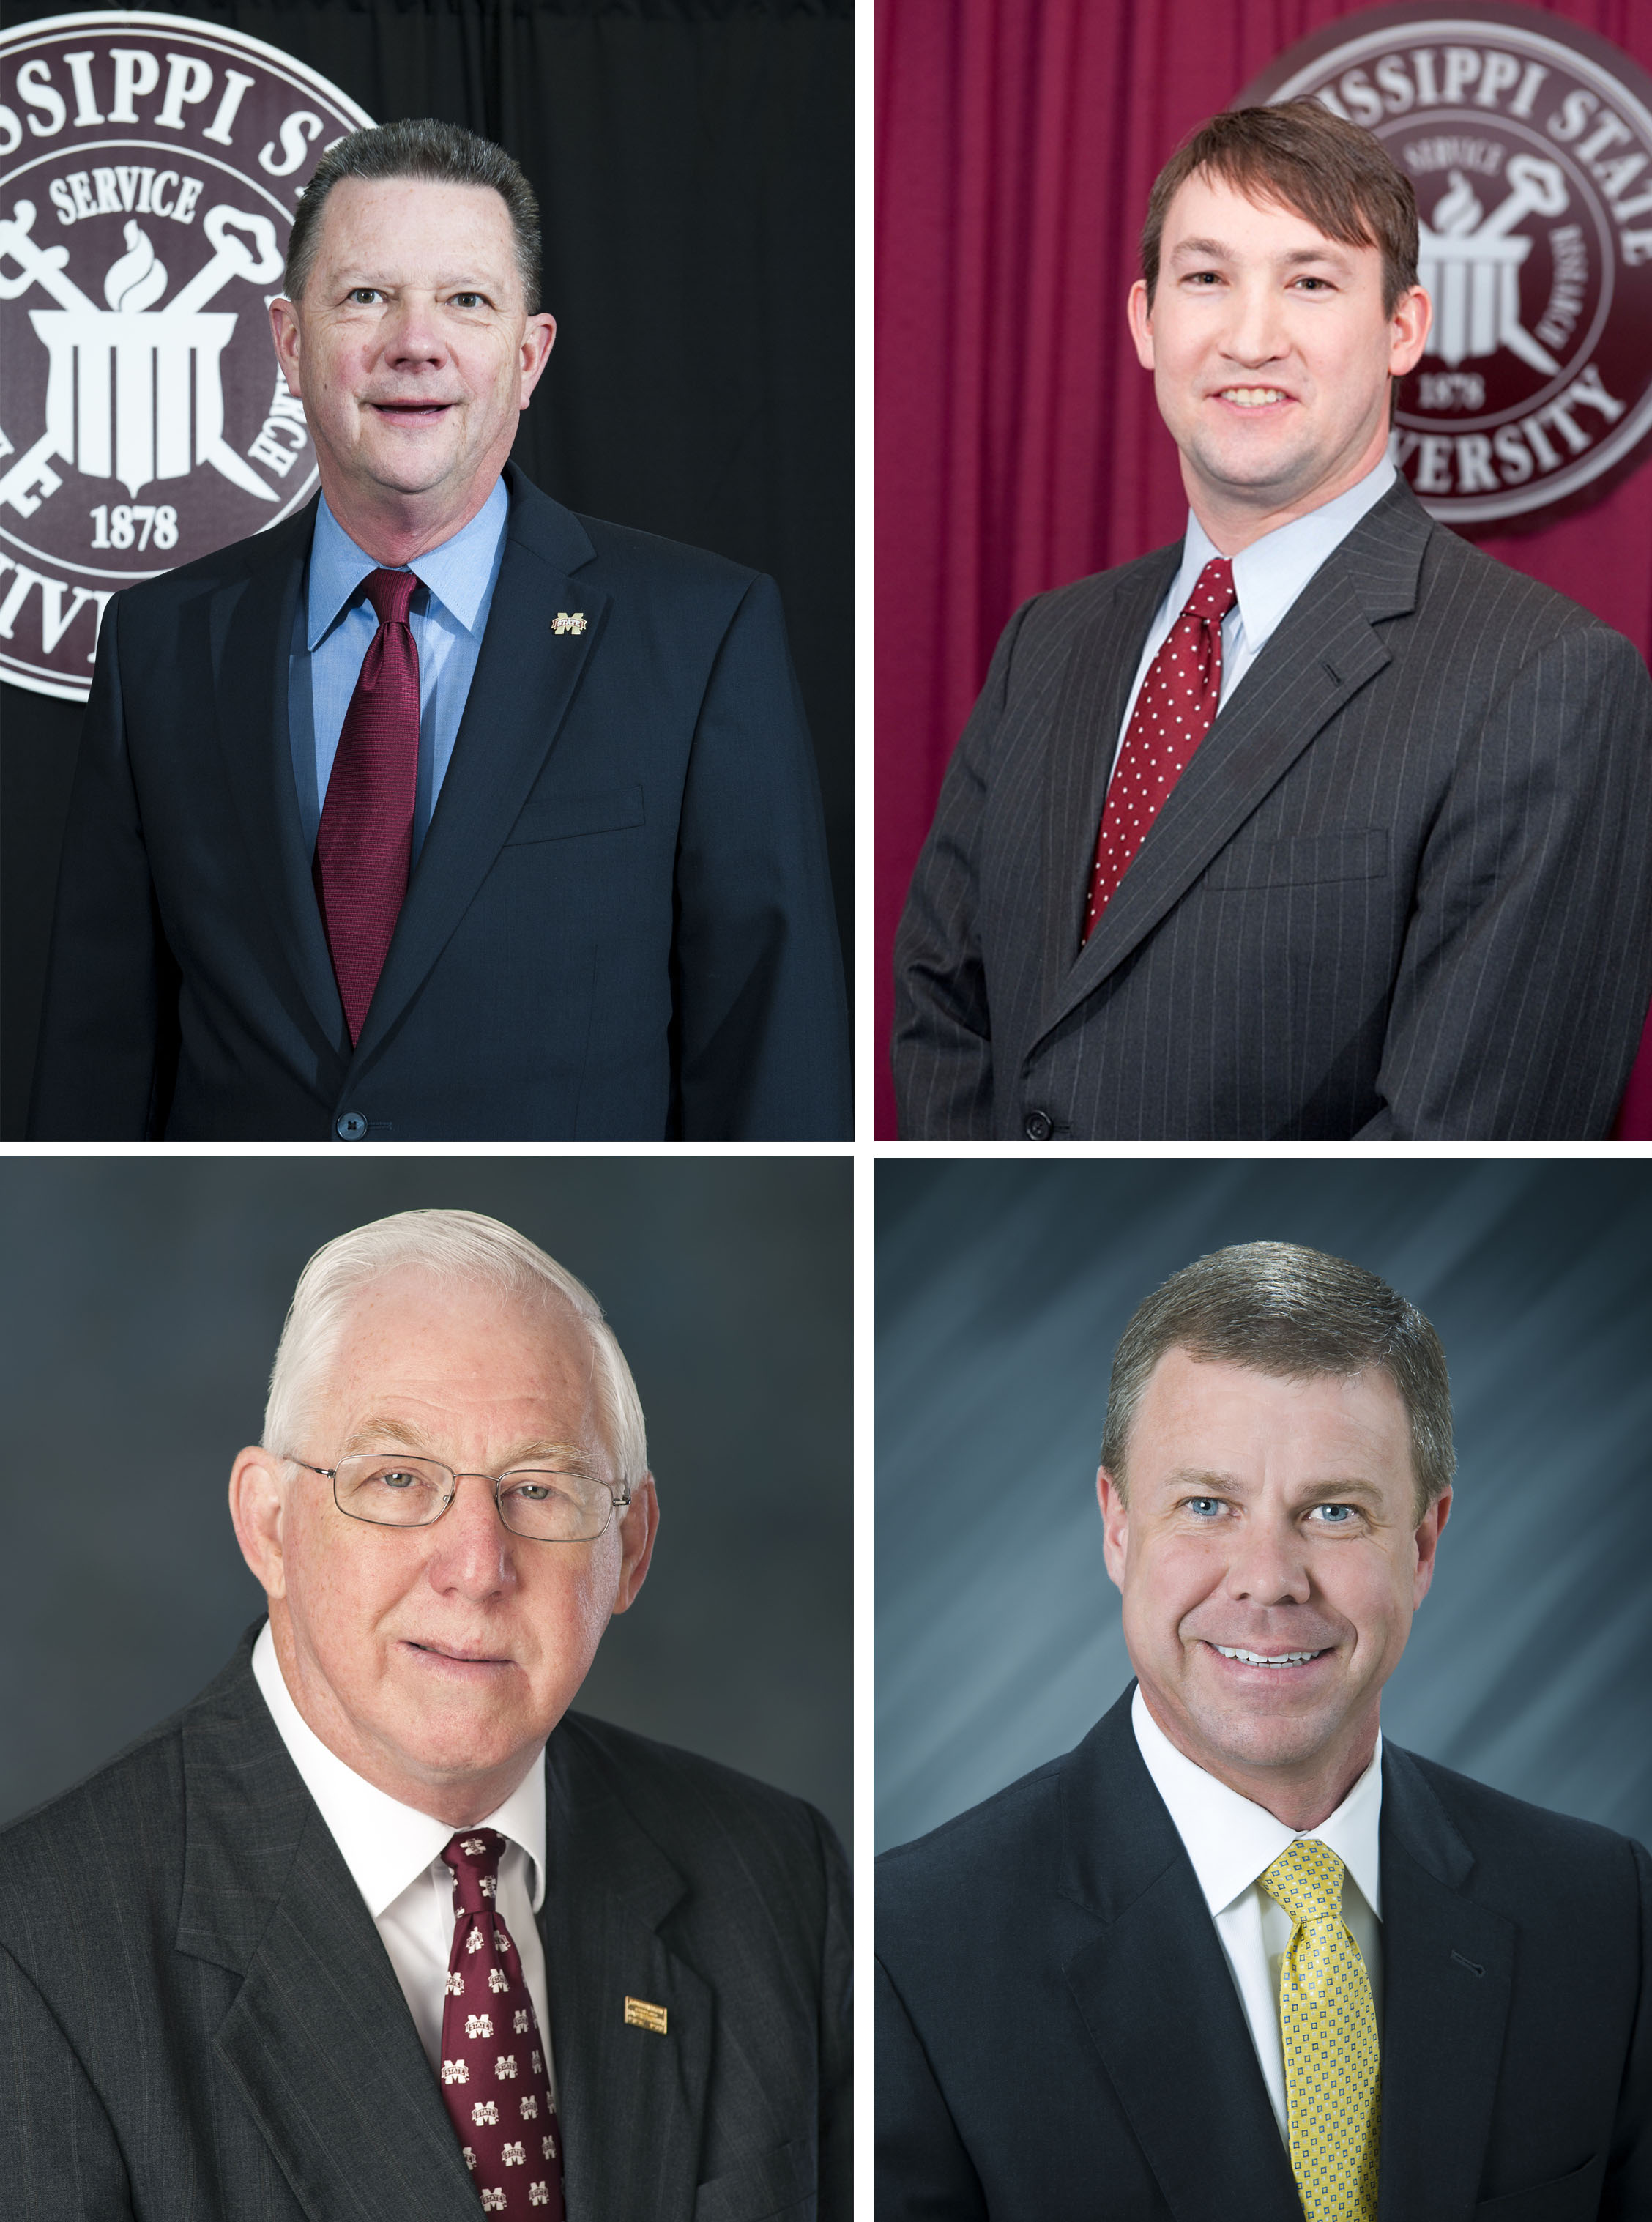 Incoming national officers for the MSU Alumni Association include top, l-r) Ronald E. Black, Brad M. Reeves, (below, l-r) Tommy R. Roberson and Jerry L. Toney.